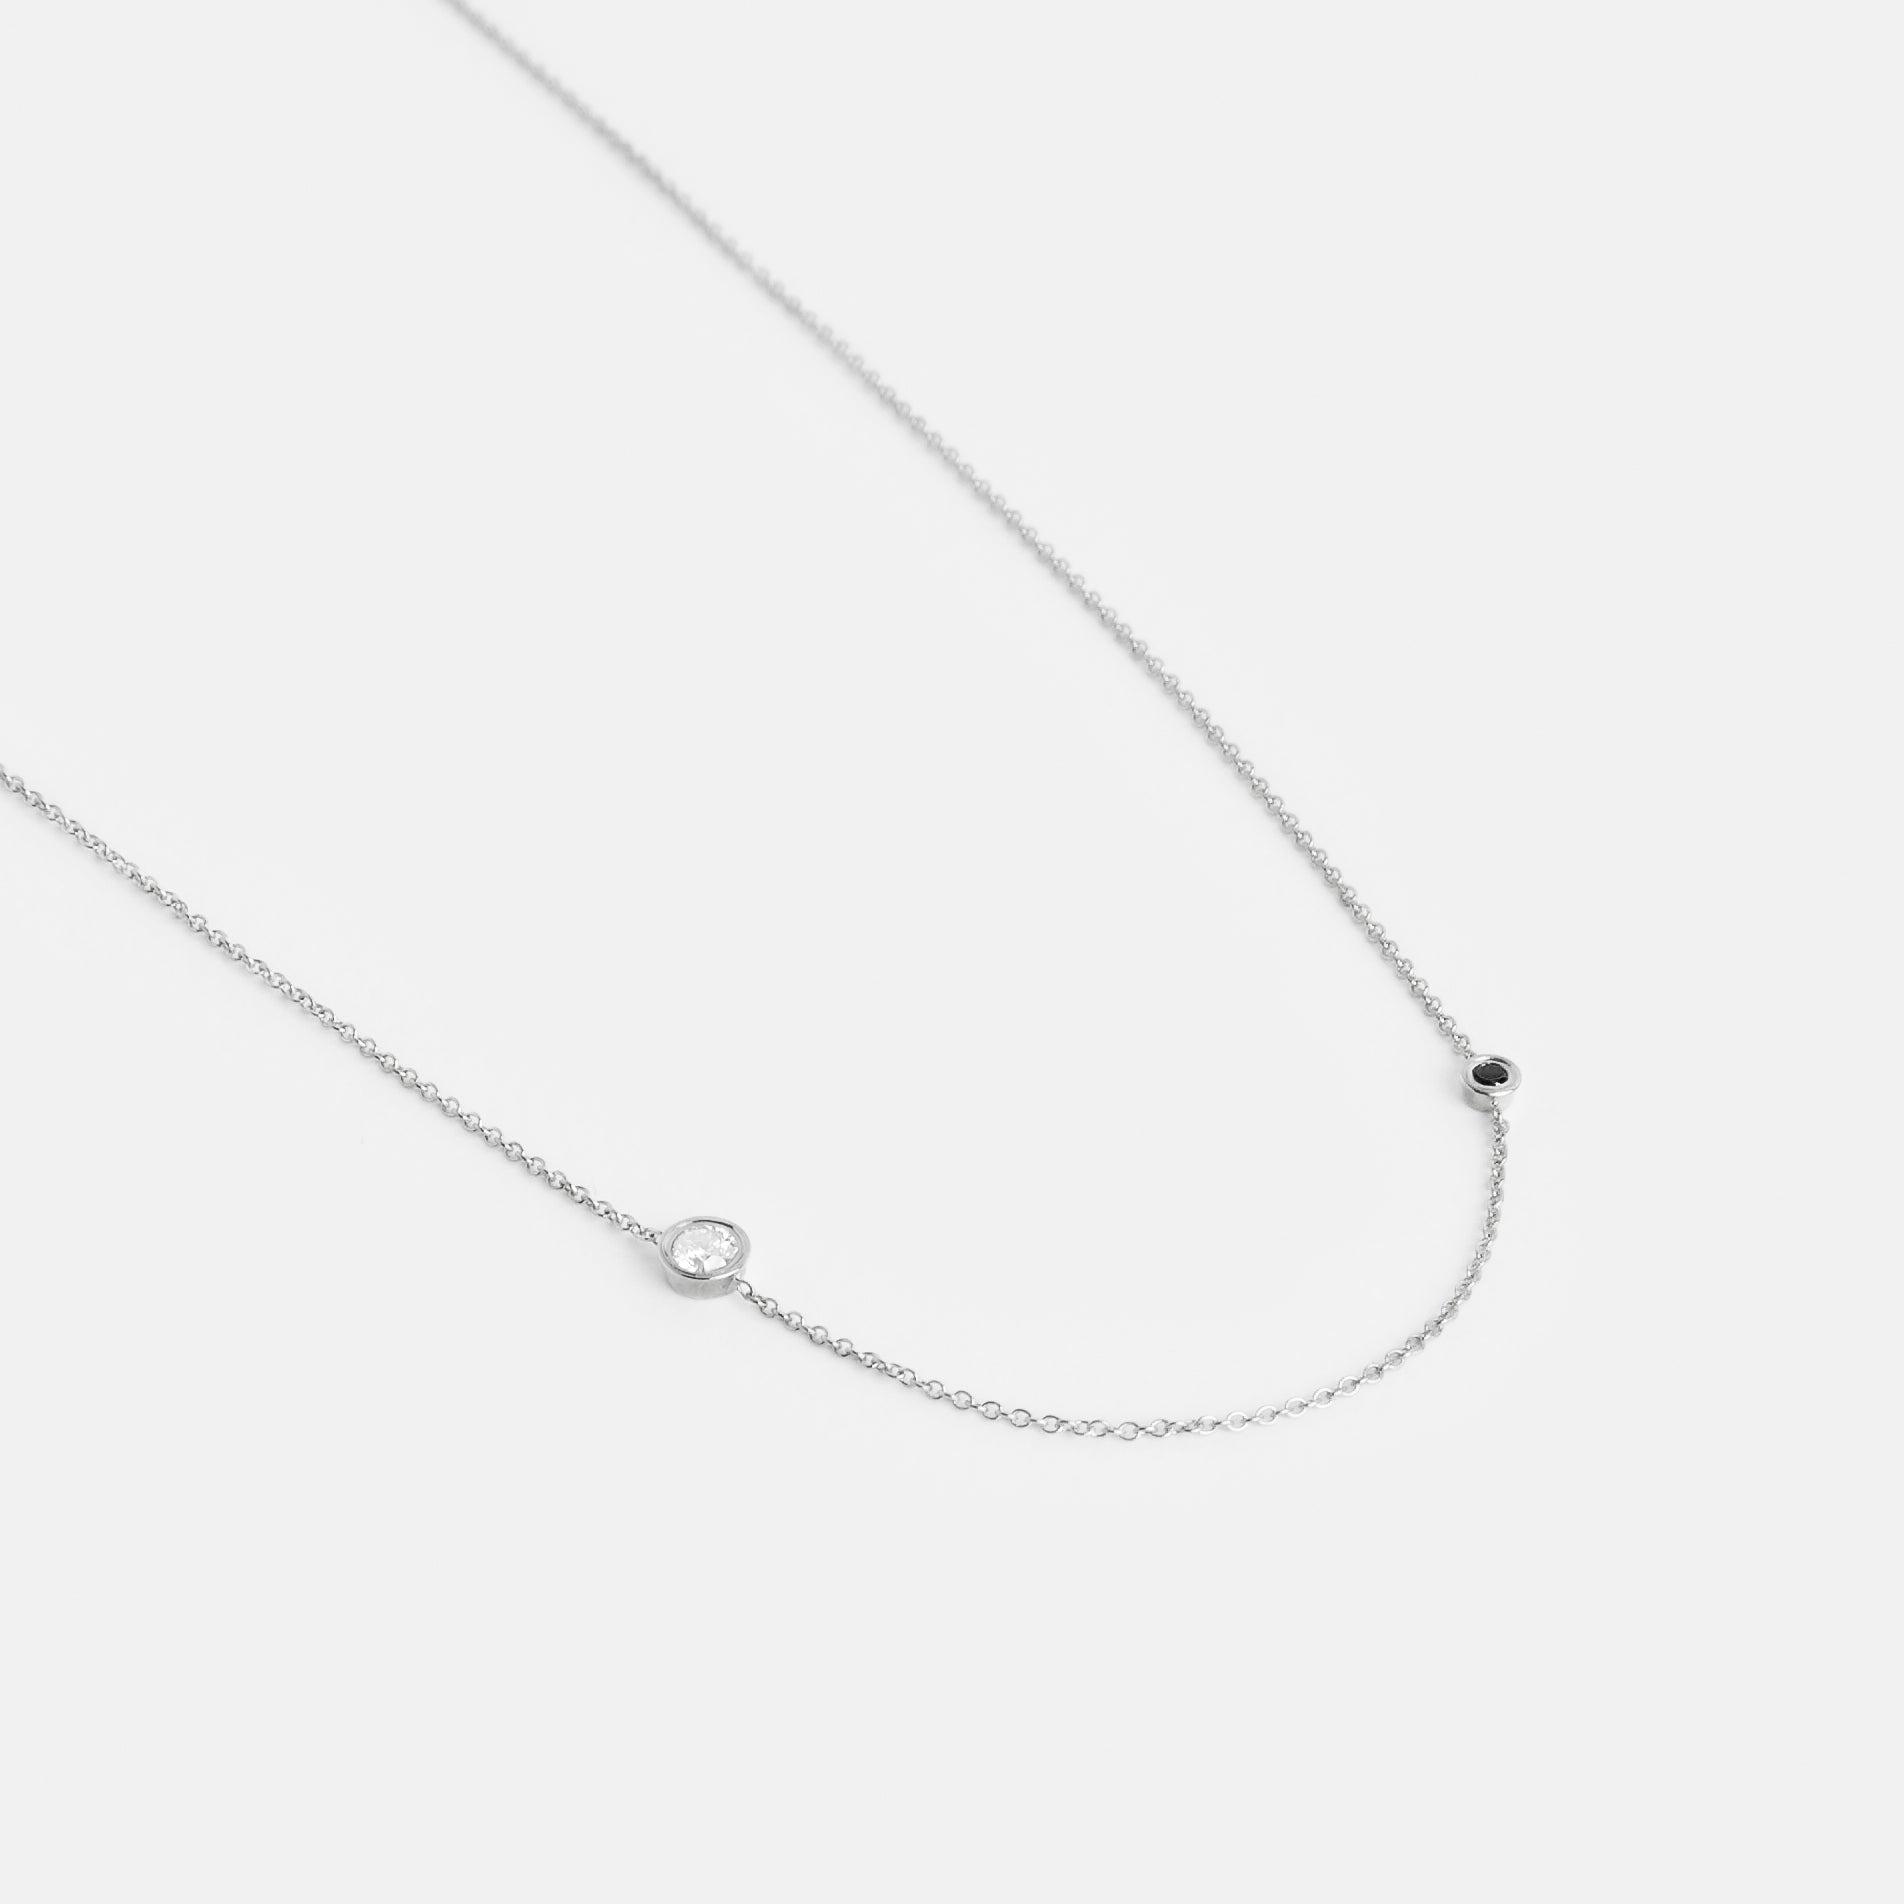 Iba Alternative Necklace in Sterling Silver set with White and Black Diamond By SHW Fine Jewelry NYC